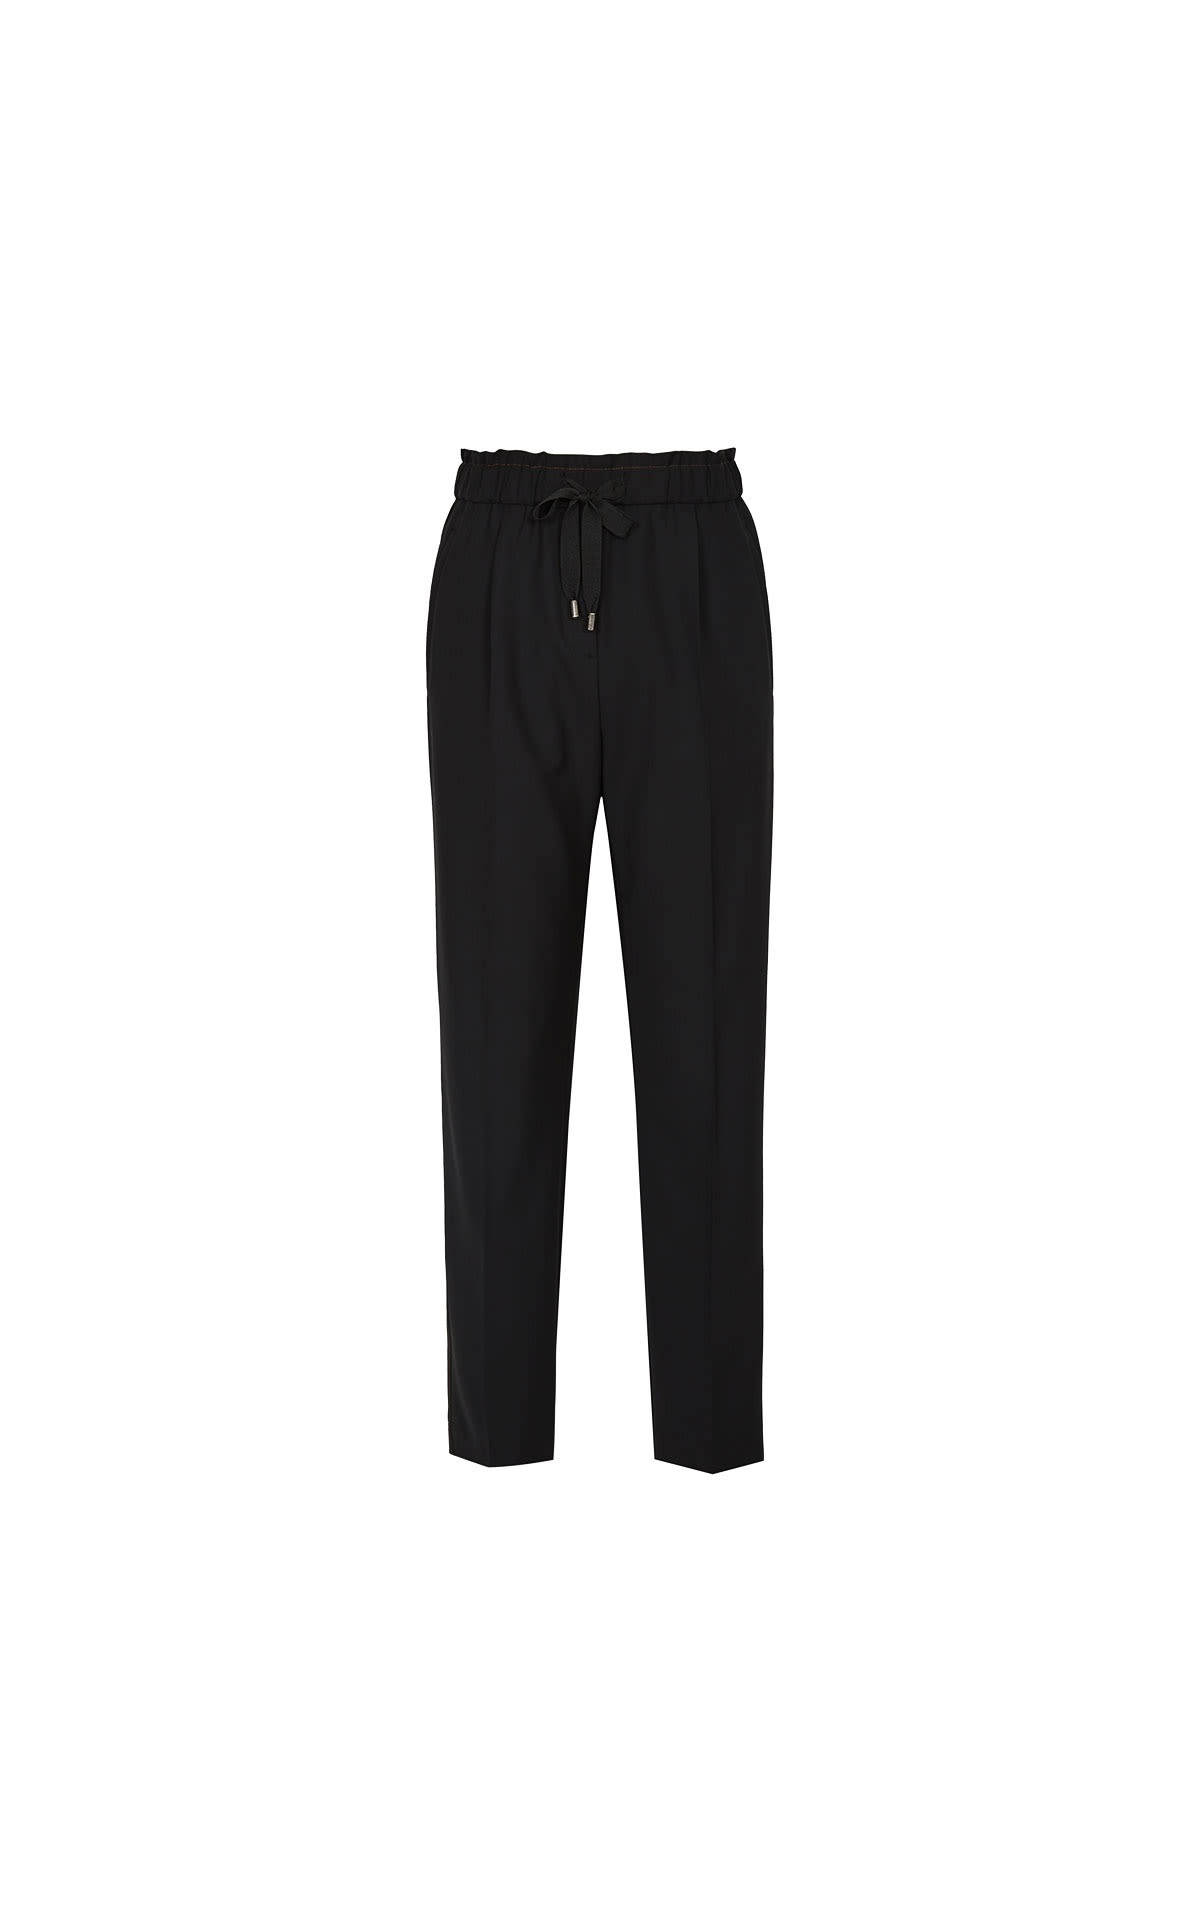 Reiss Perry pull on trousers from Bicester Village